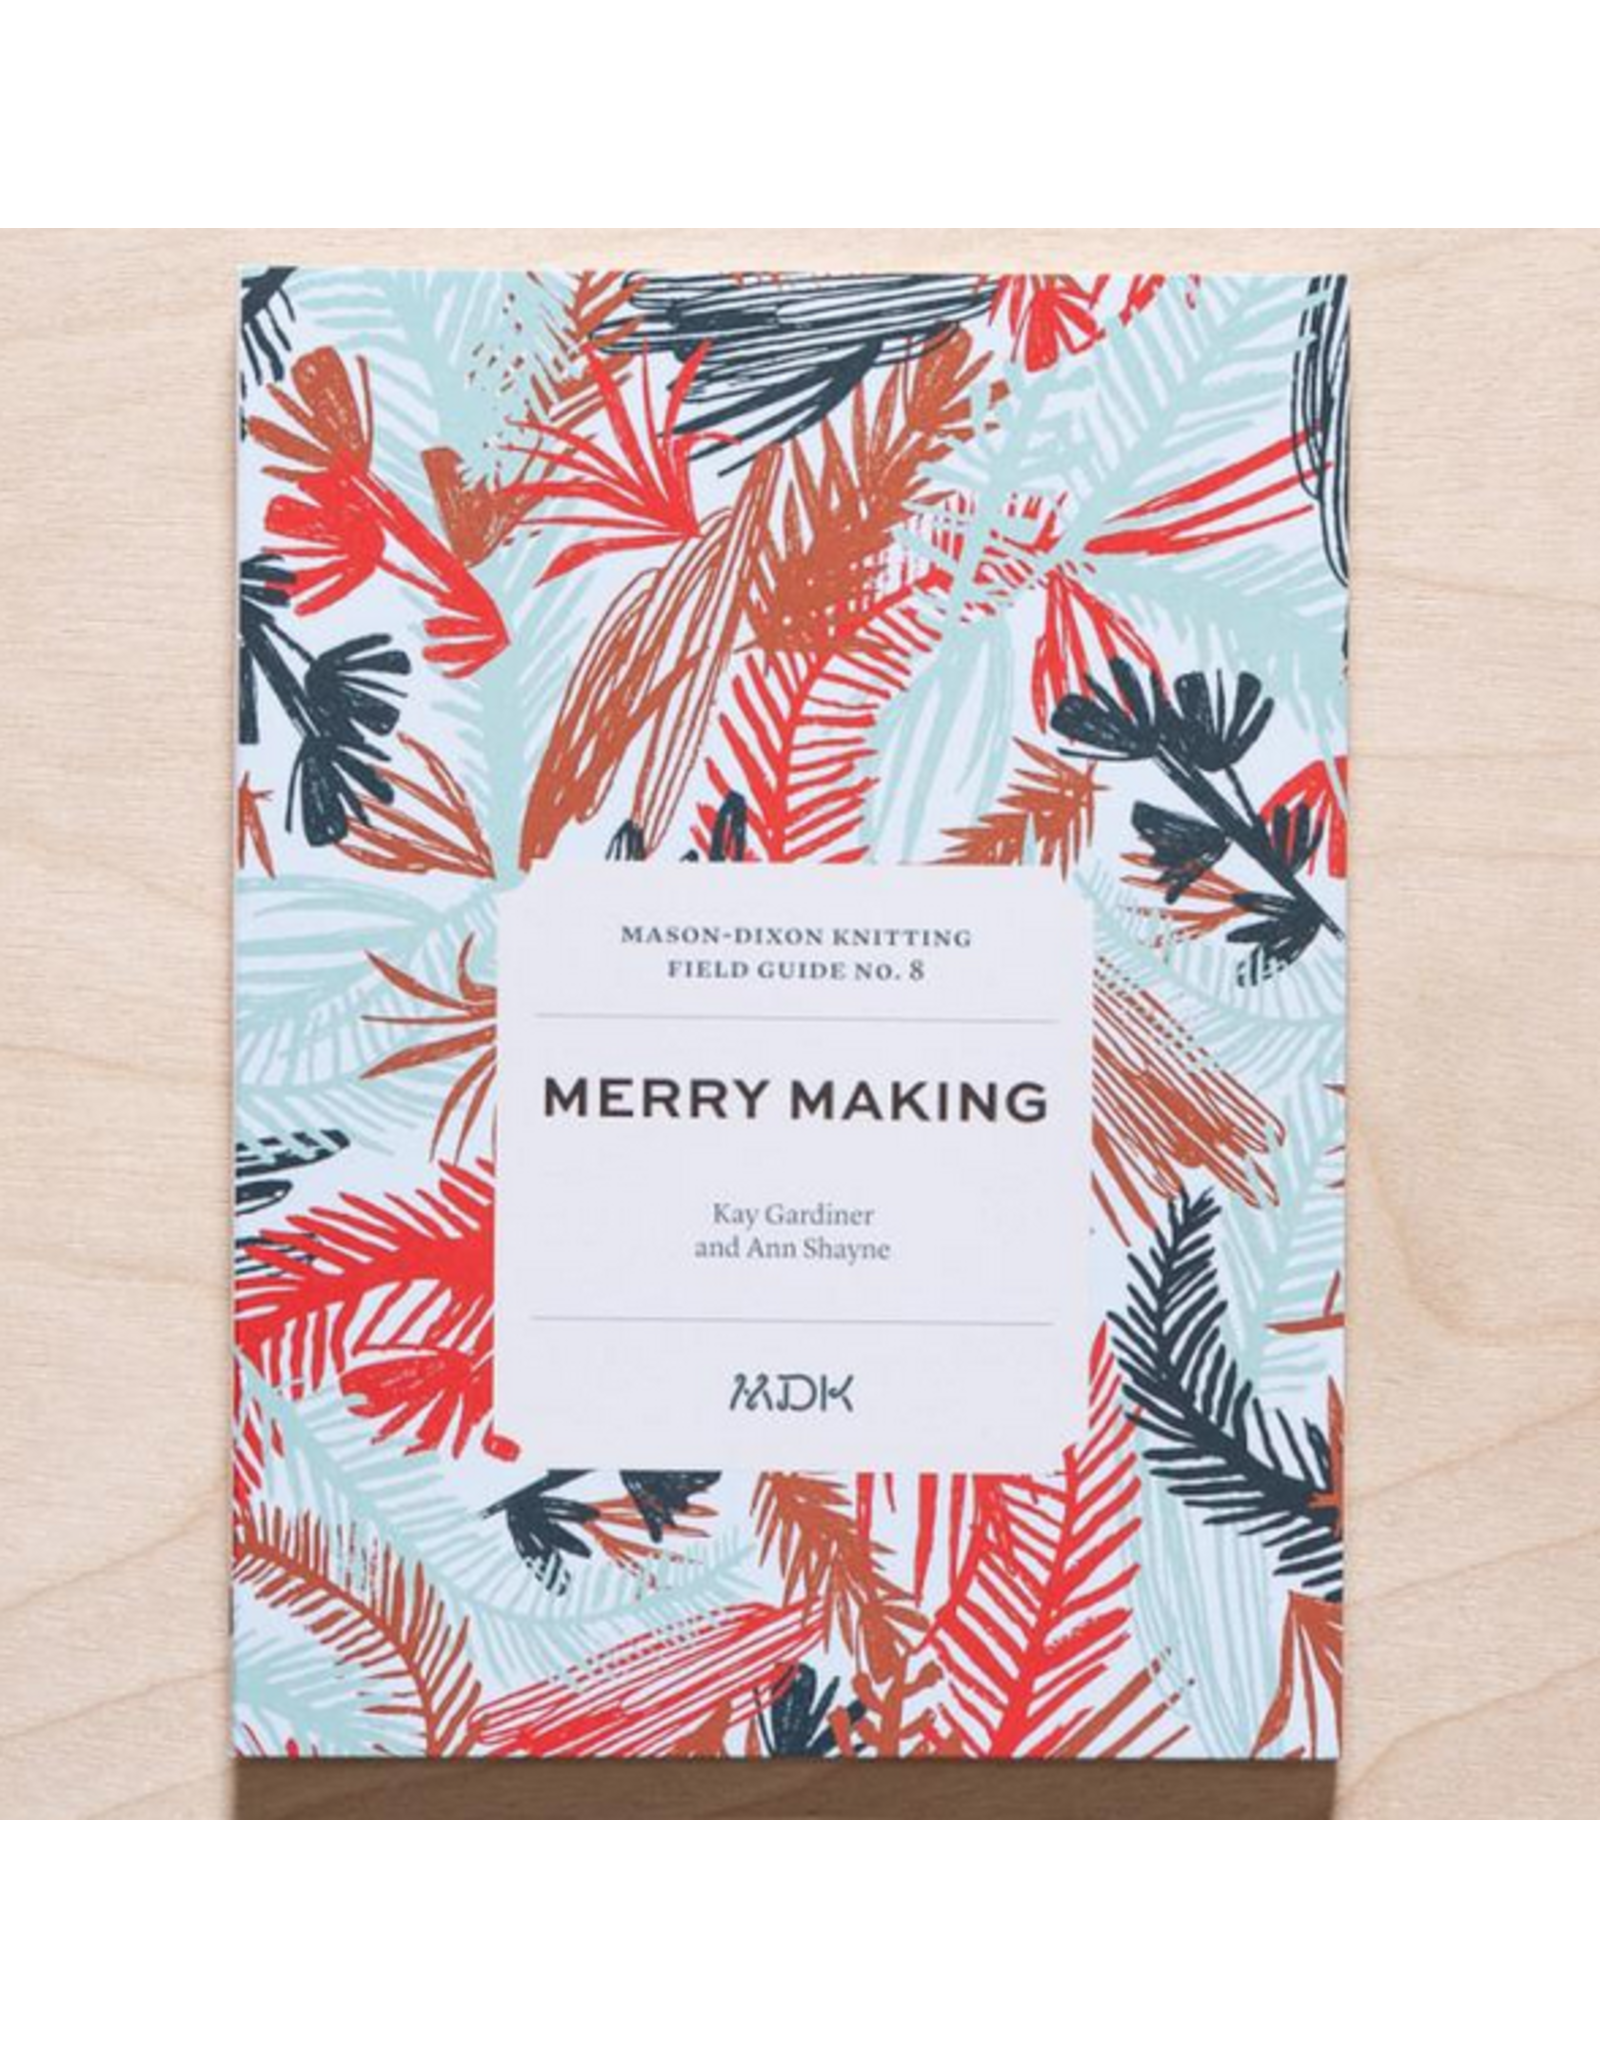 Modern Daily Knitting Field Guide No. 8 - Merry Making - Thea Colman